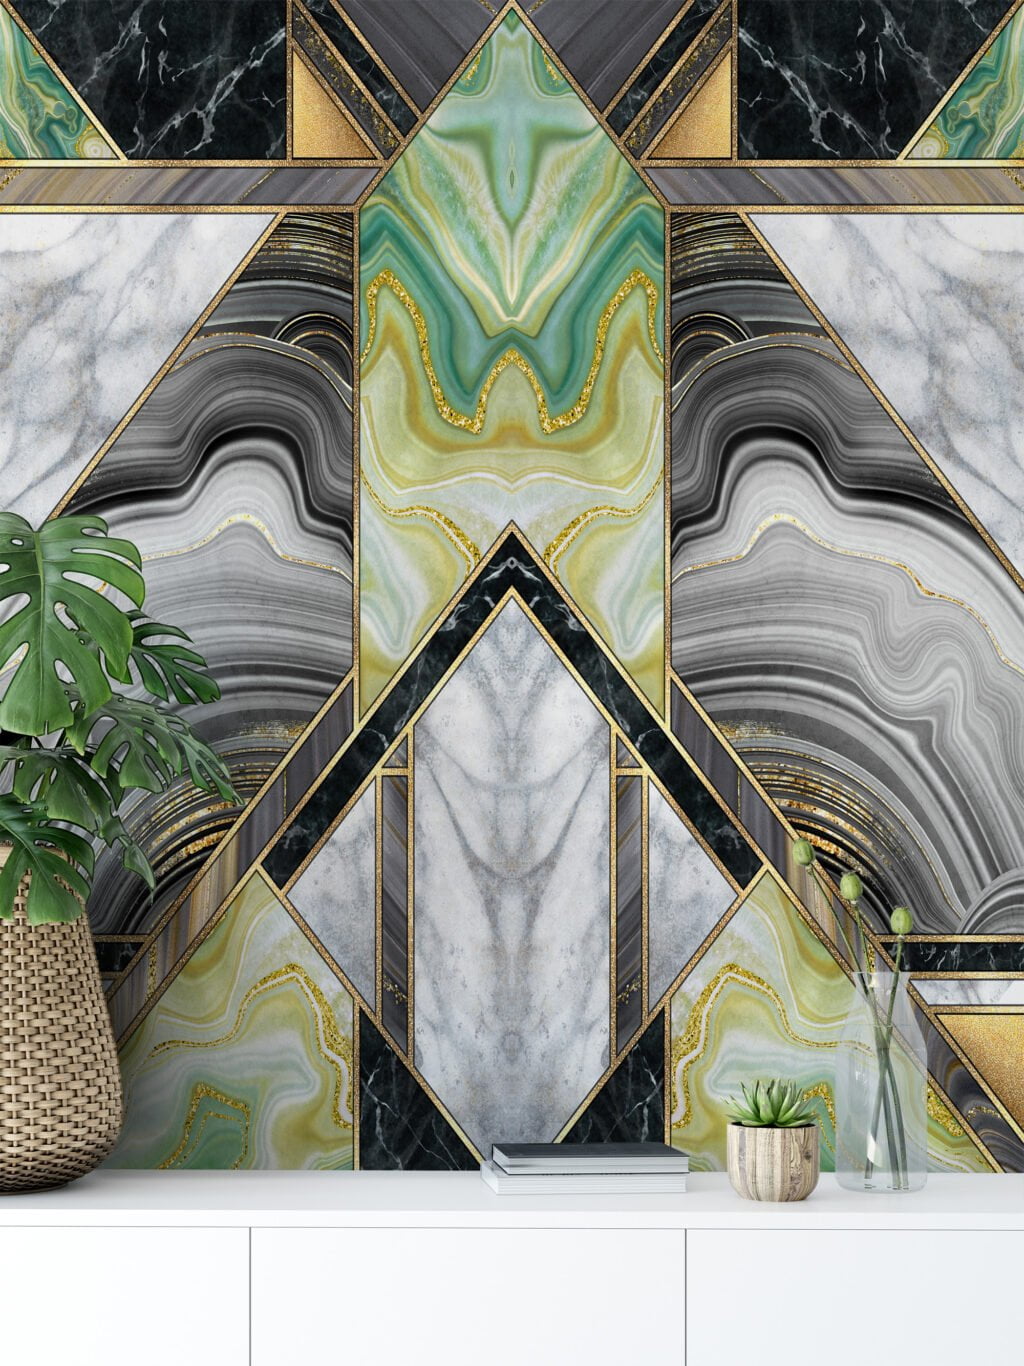 Contemporary Green and Gold Marble Mural Wallpaper - Easy to Install and Suitable for Any Room in Your Home or Office.